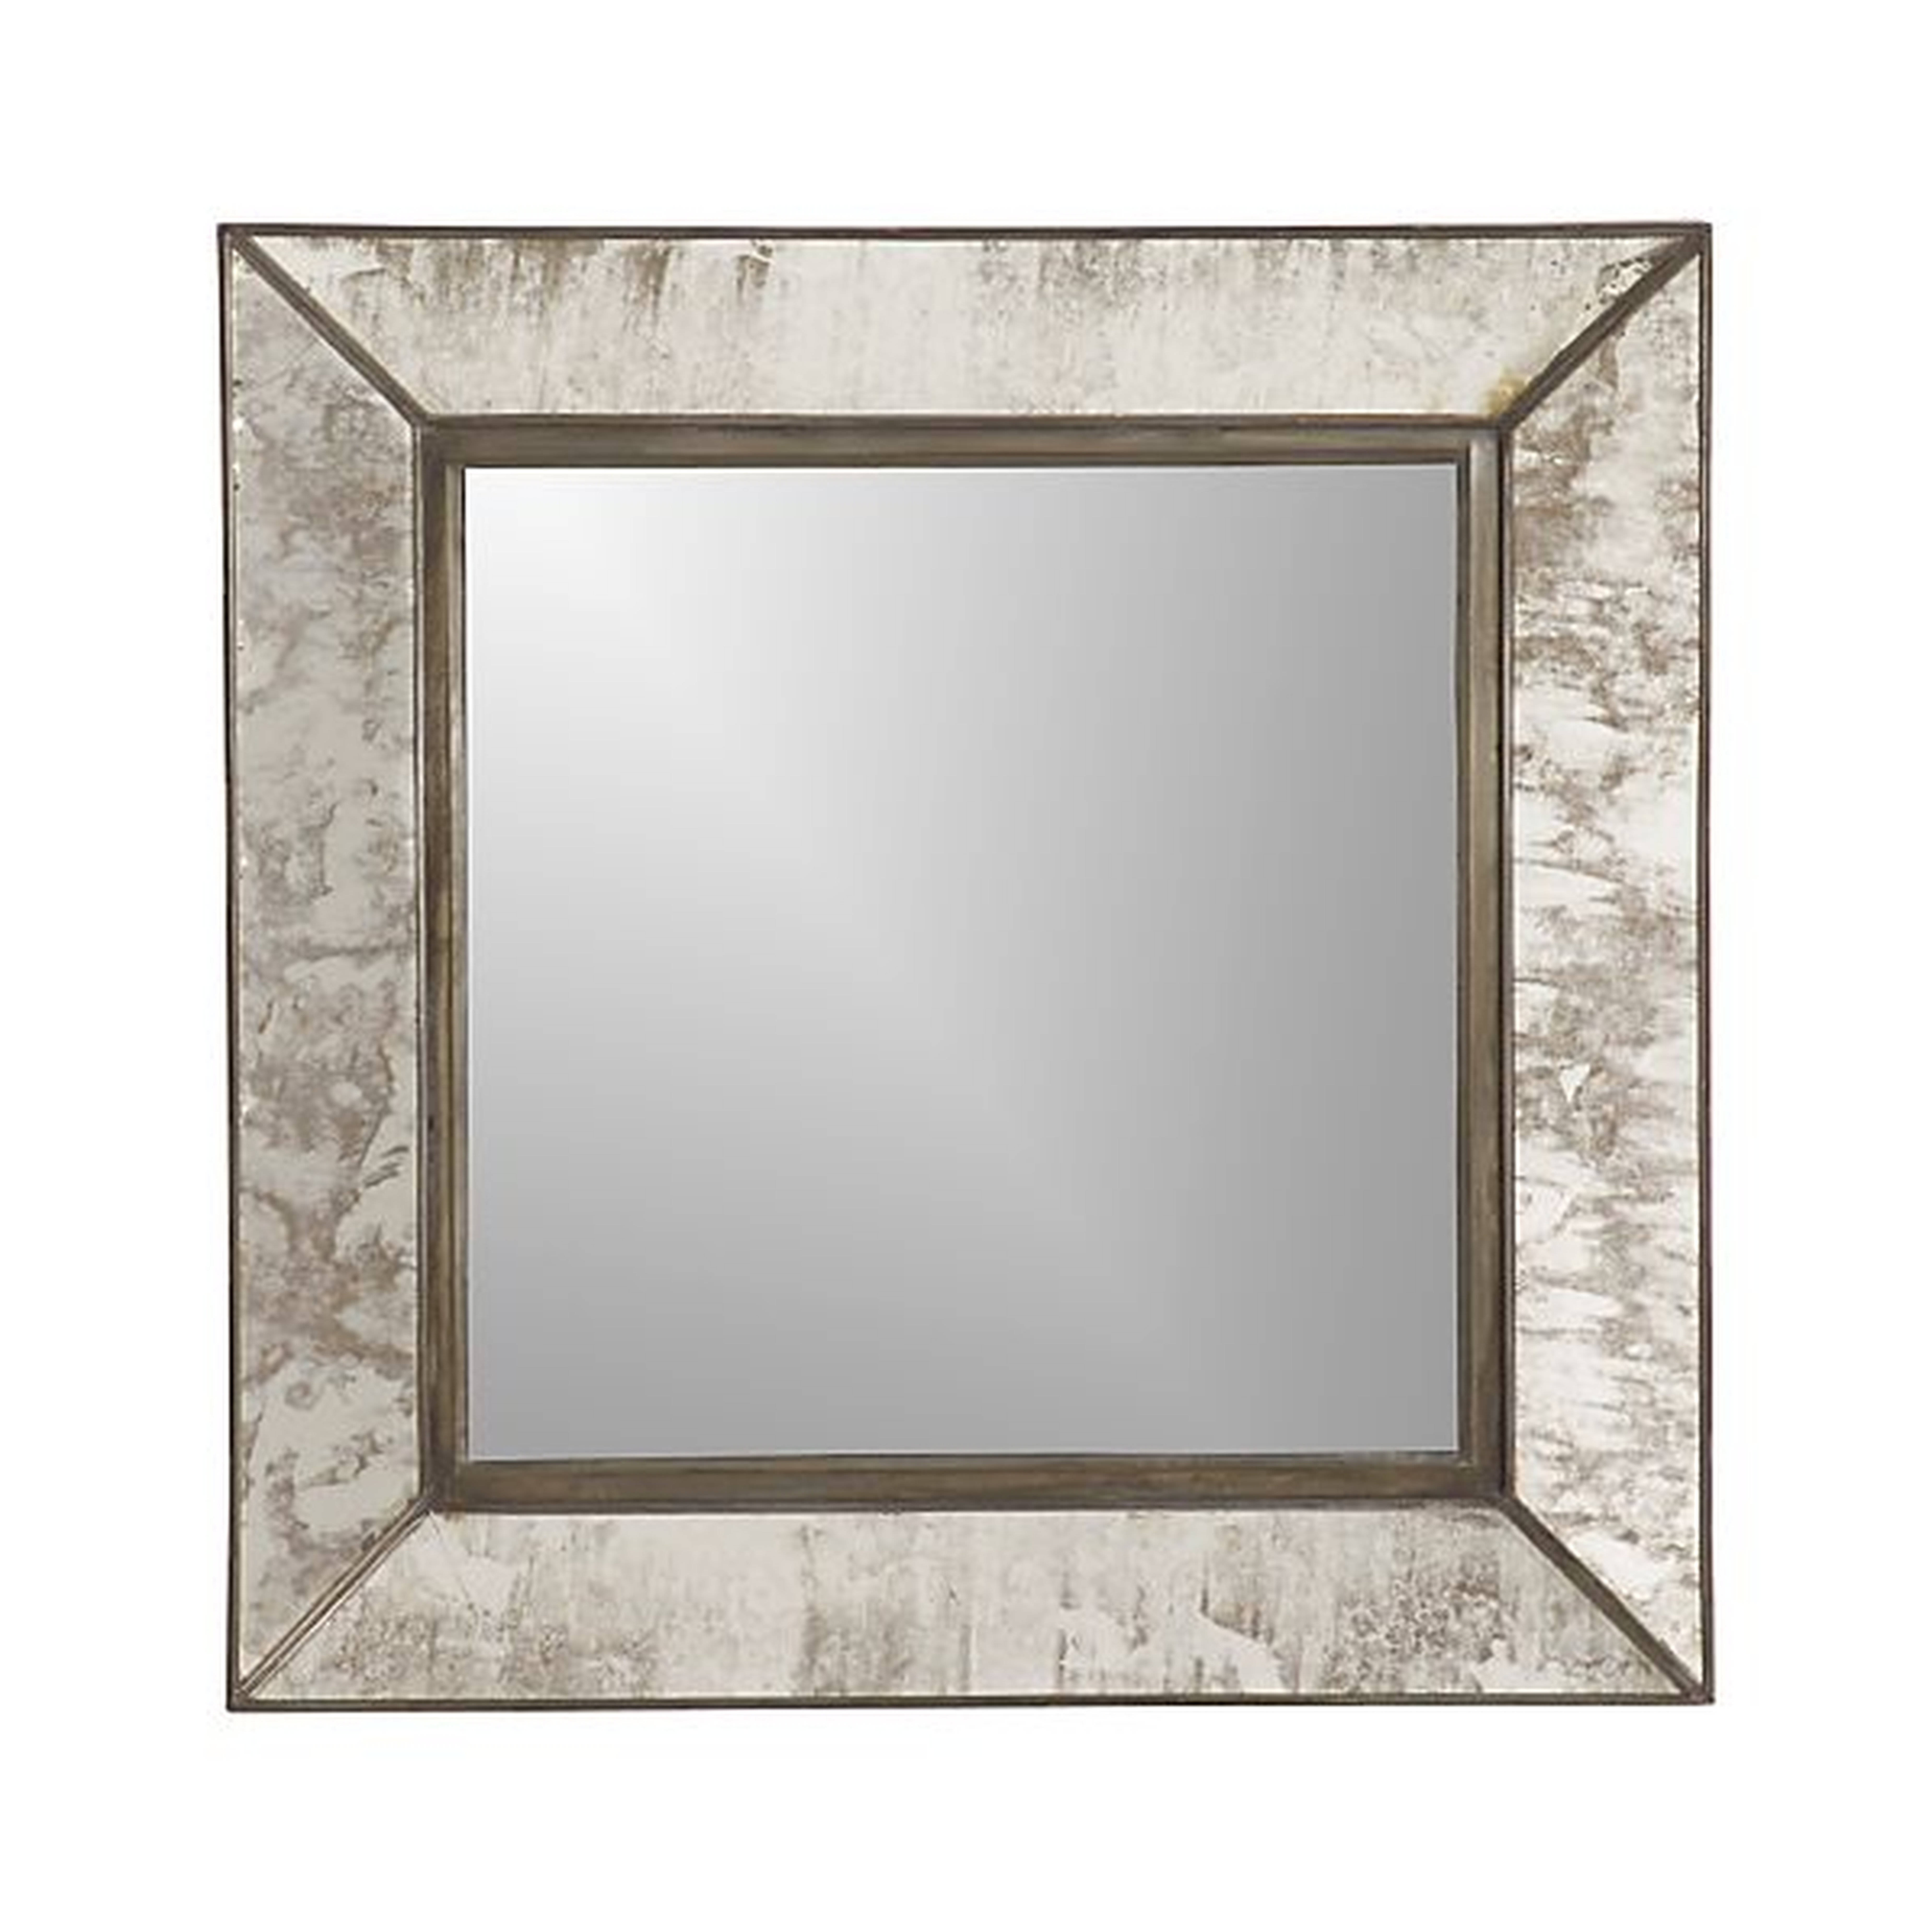 Dubois Small Square Wall Mirror - Crate and Barrel